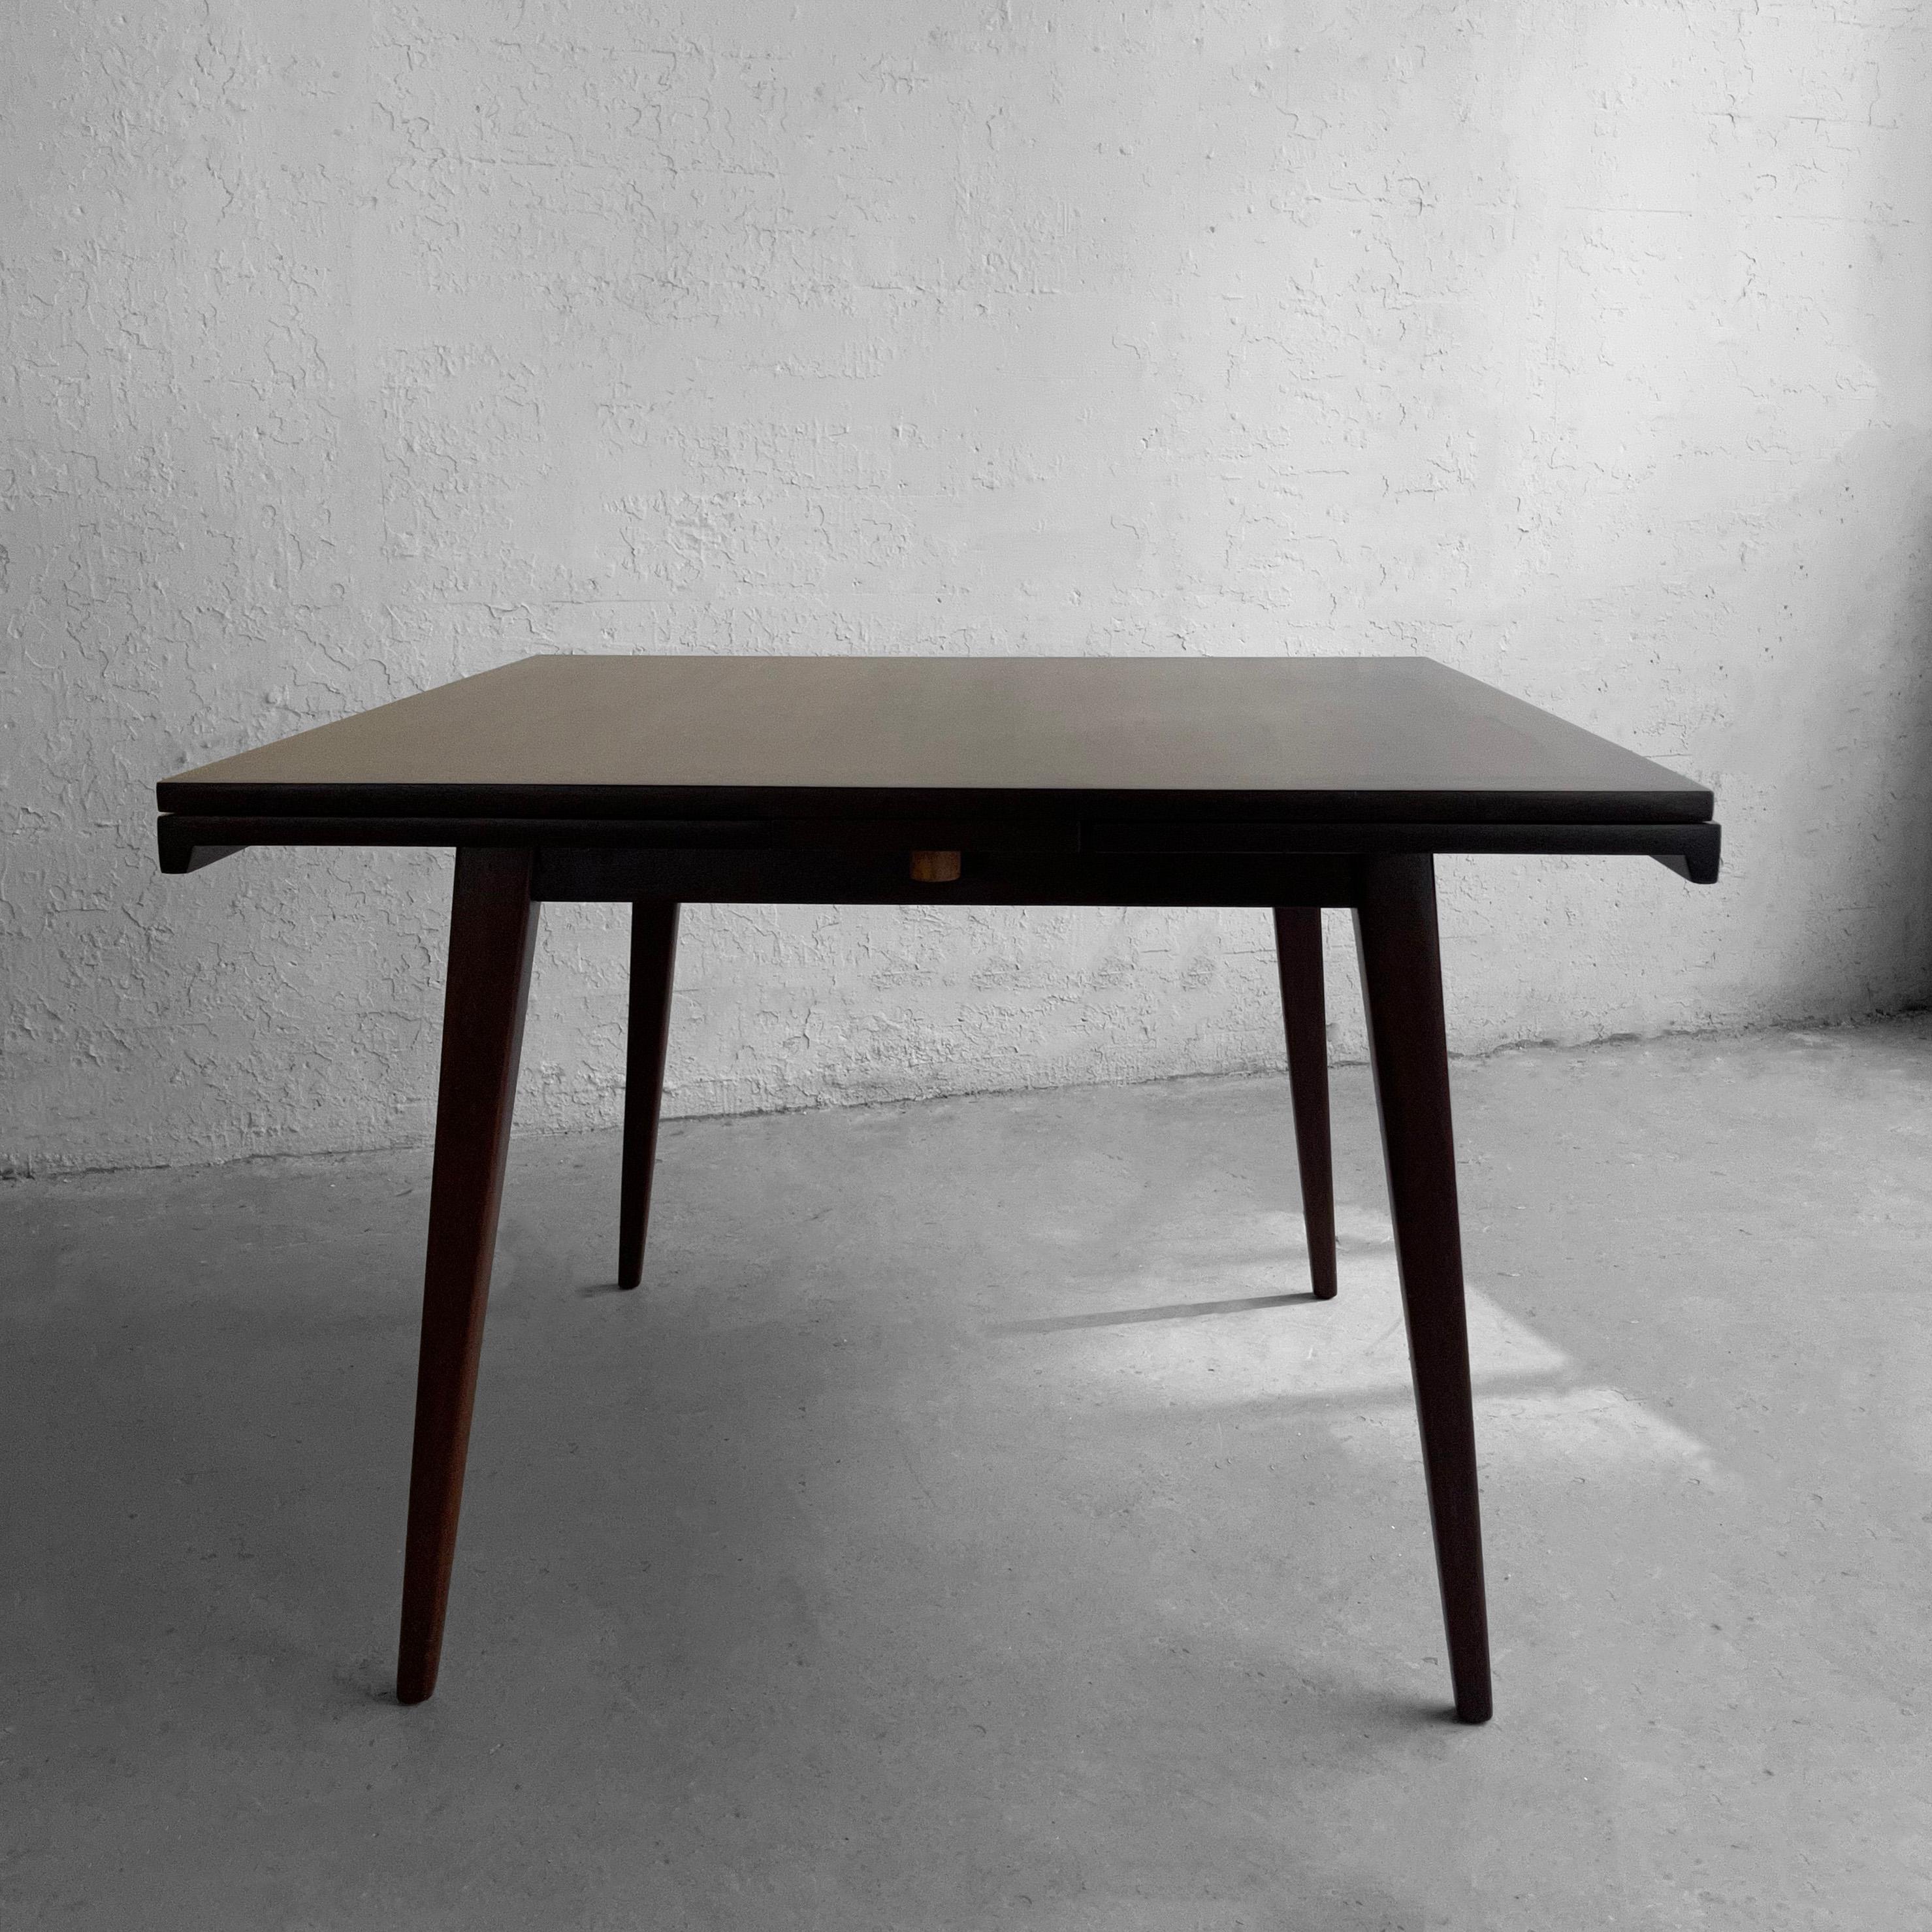 20th Century Jens Risom Square Walnut Extension Dining Table For Sale